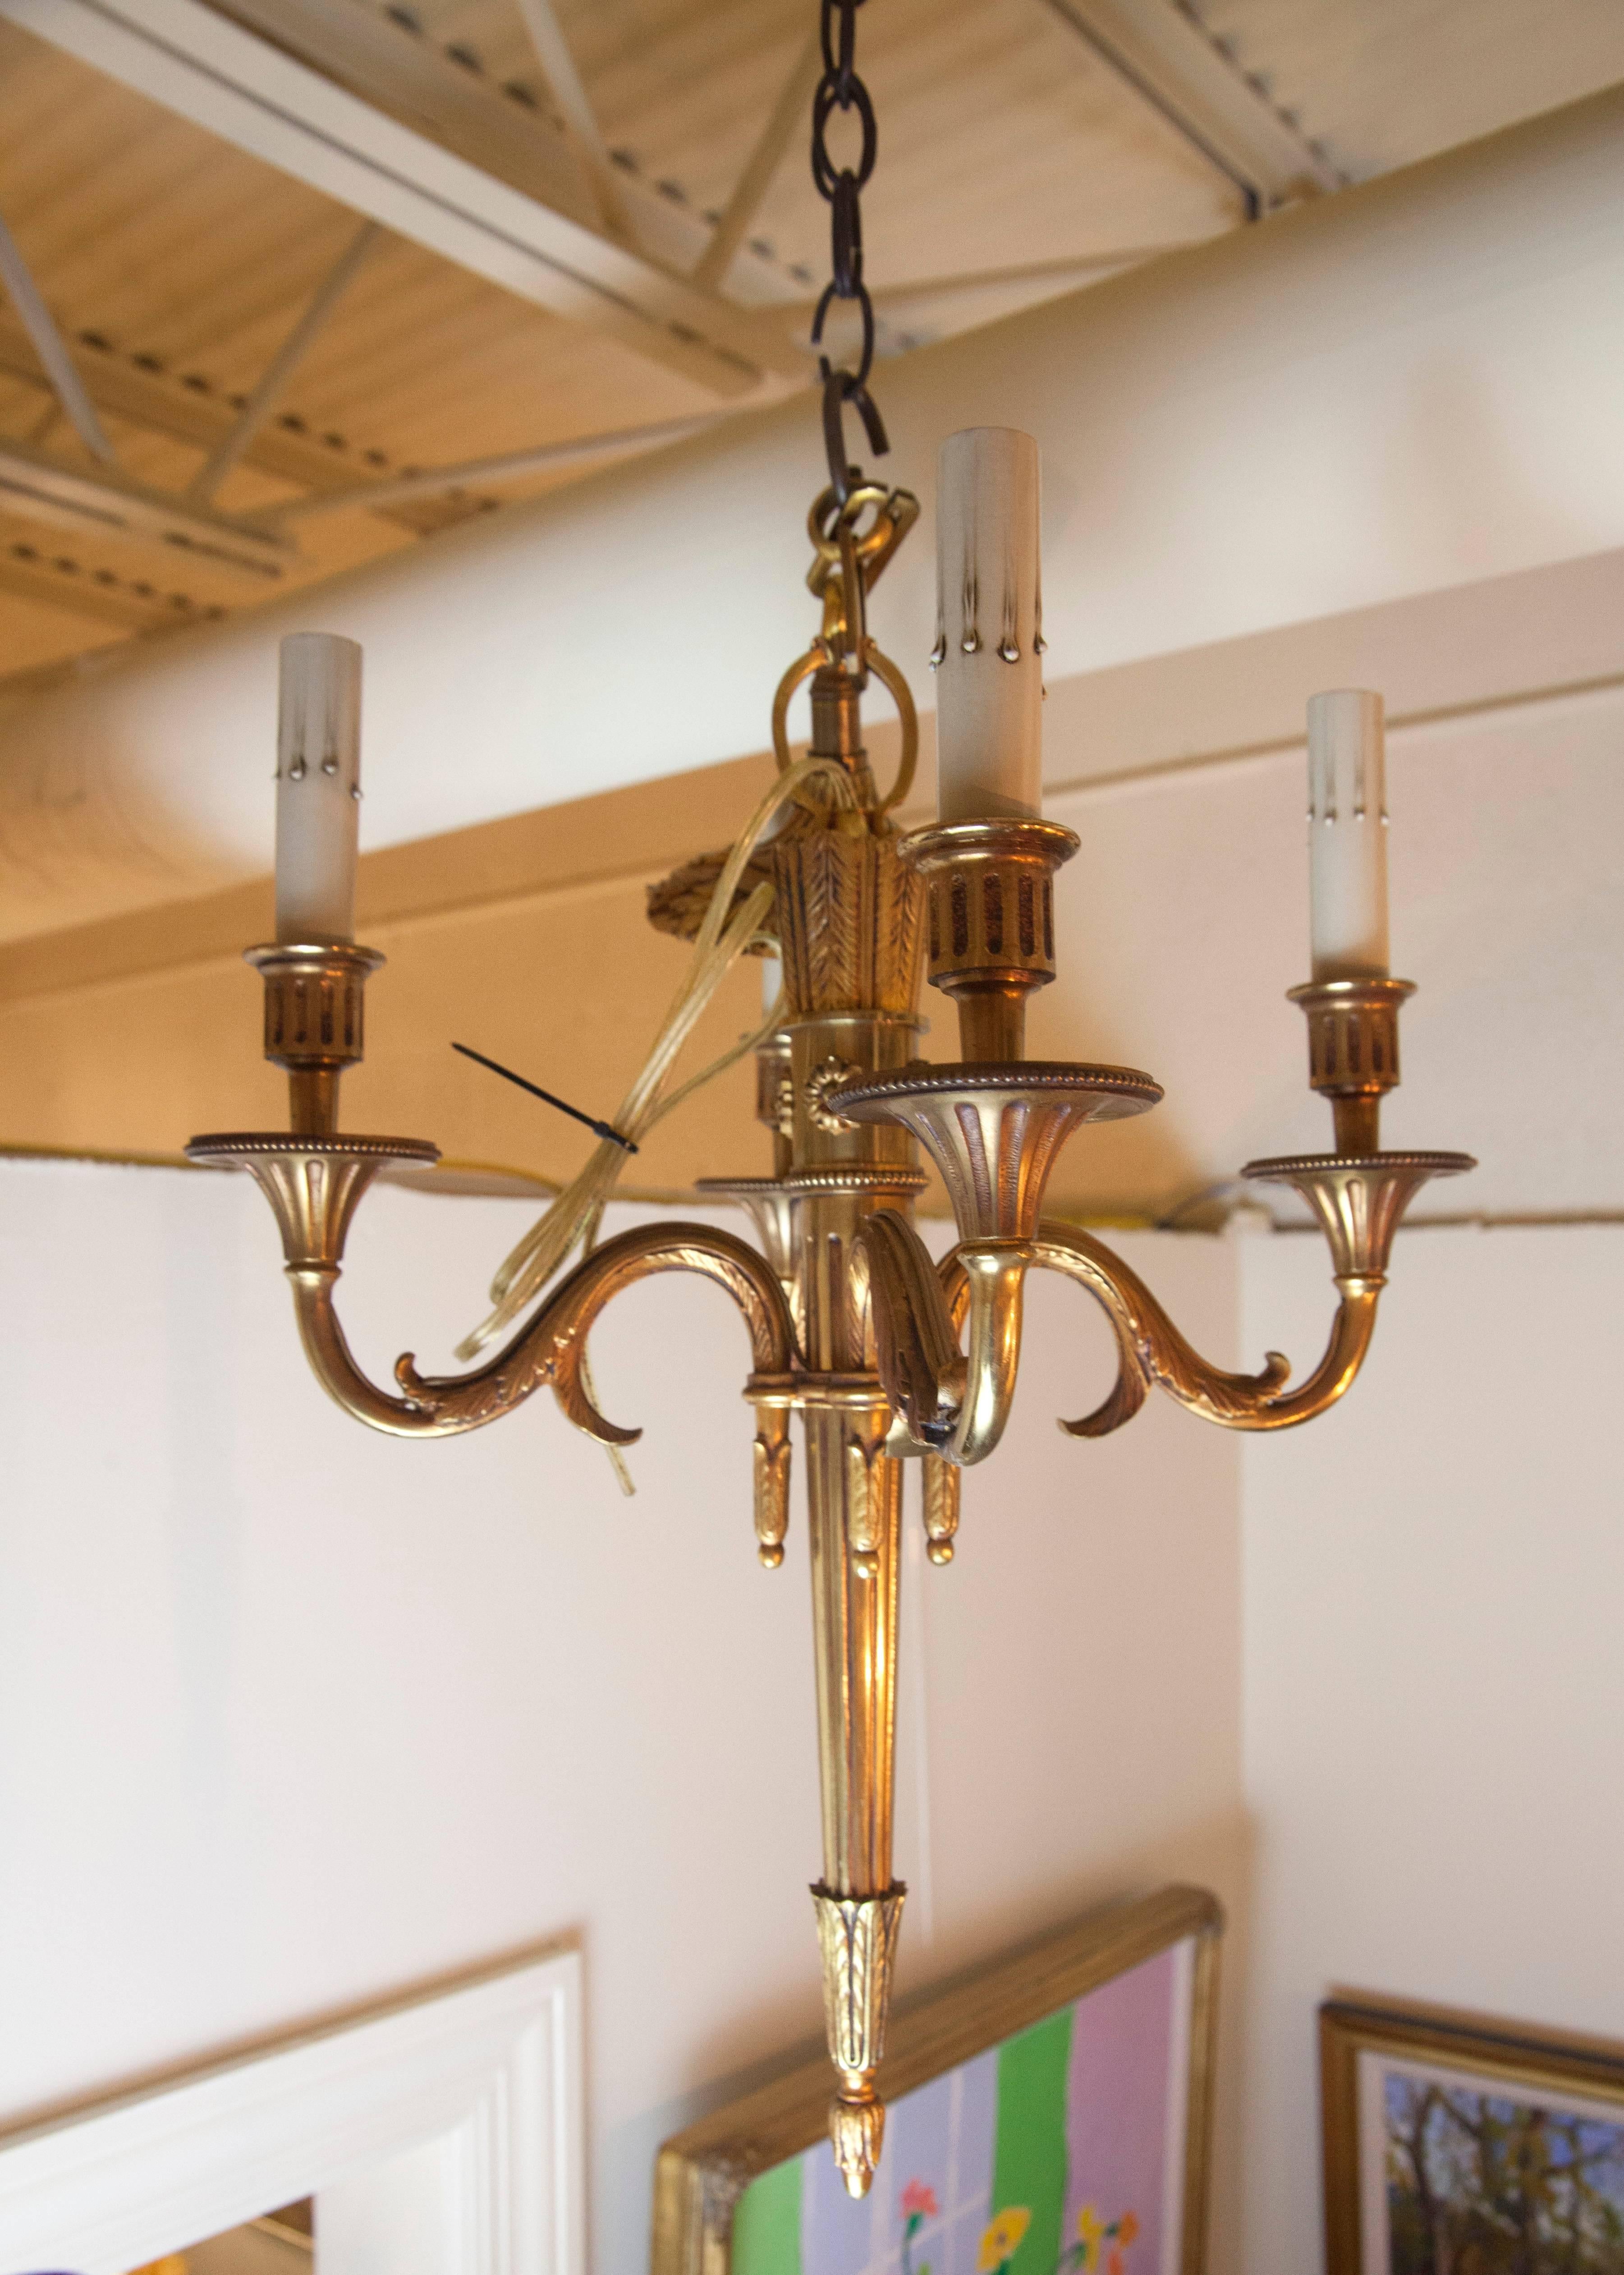 This small bronze Empire chandelier has four arms and has been newly rewired for American use.